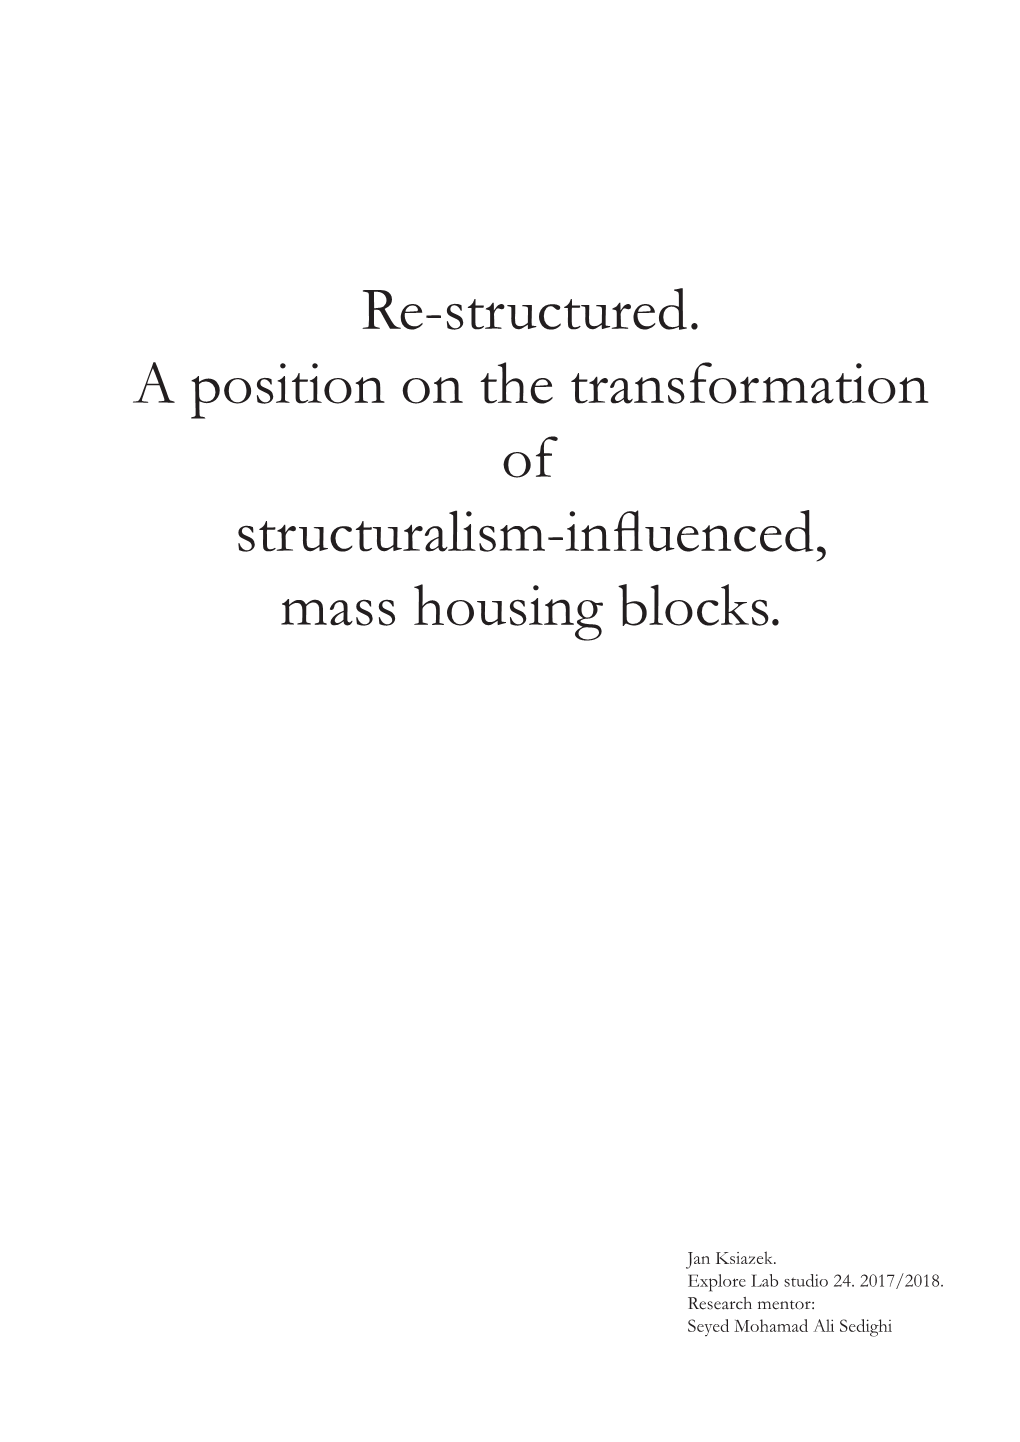 Re-Structured. a Position on the Transformation of Structuralism-Influenced, Mass Housing Blocks